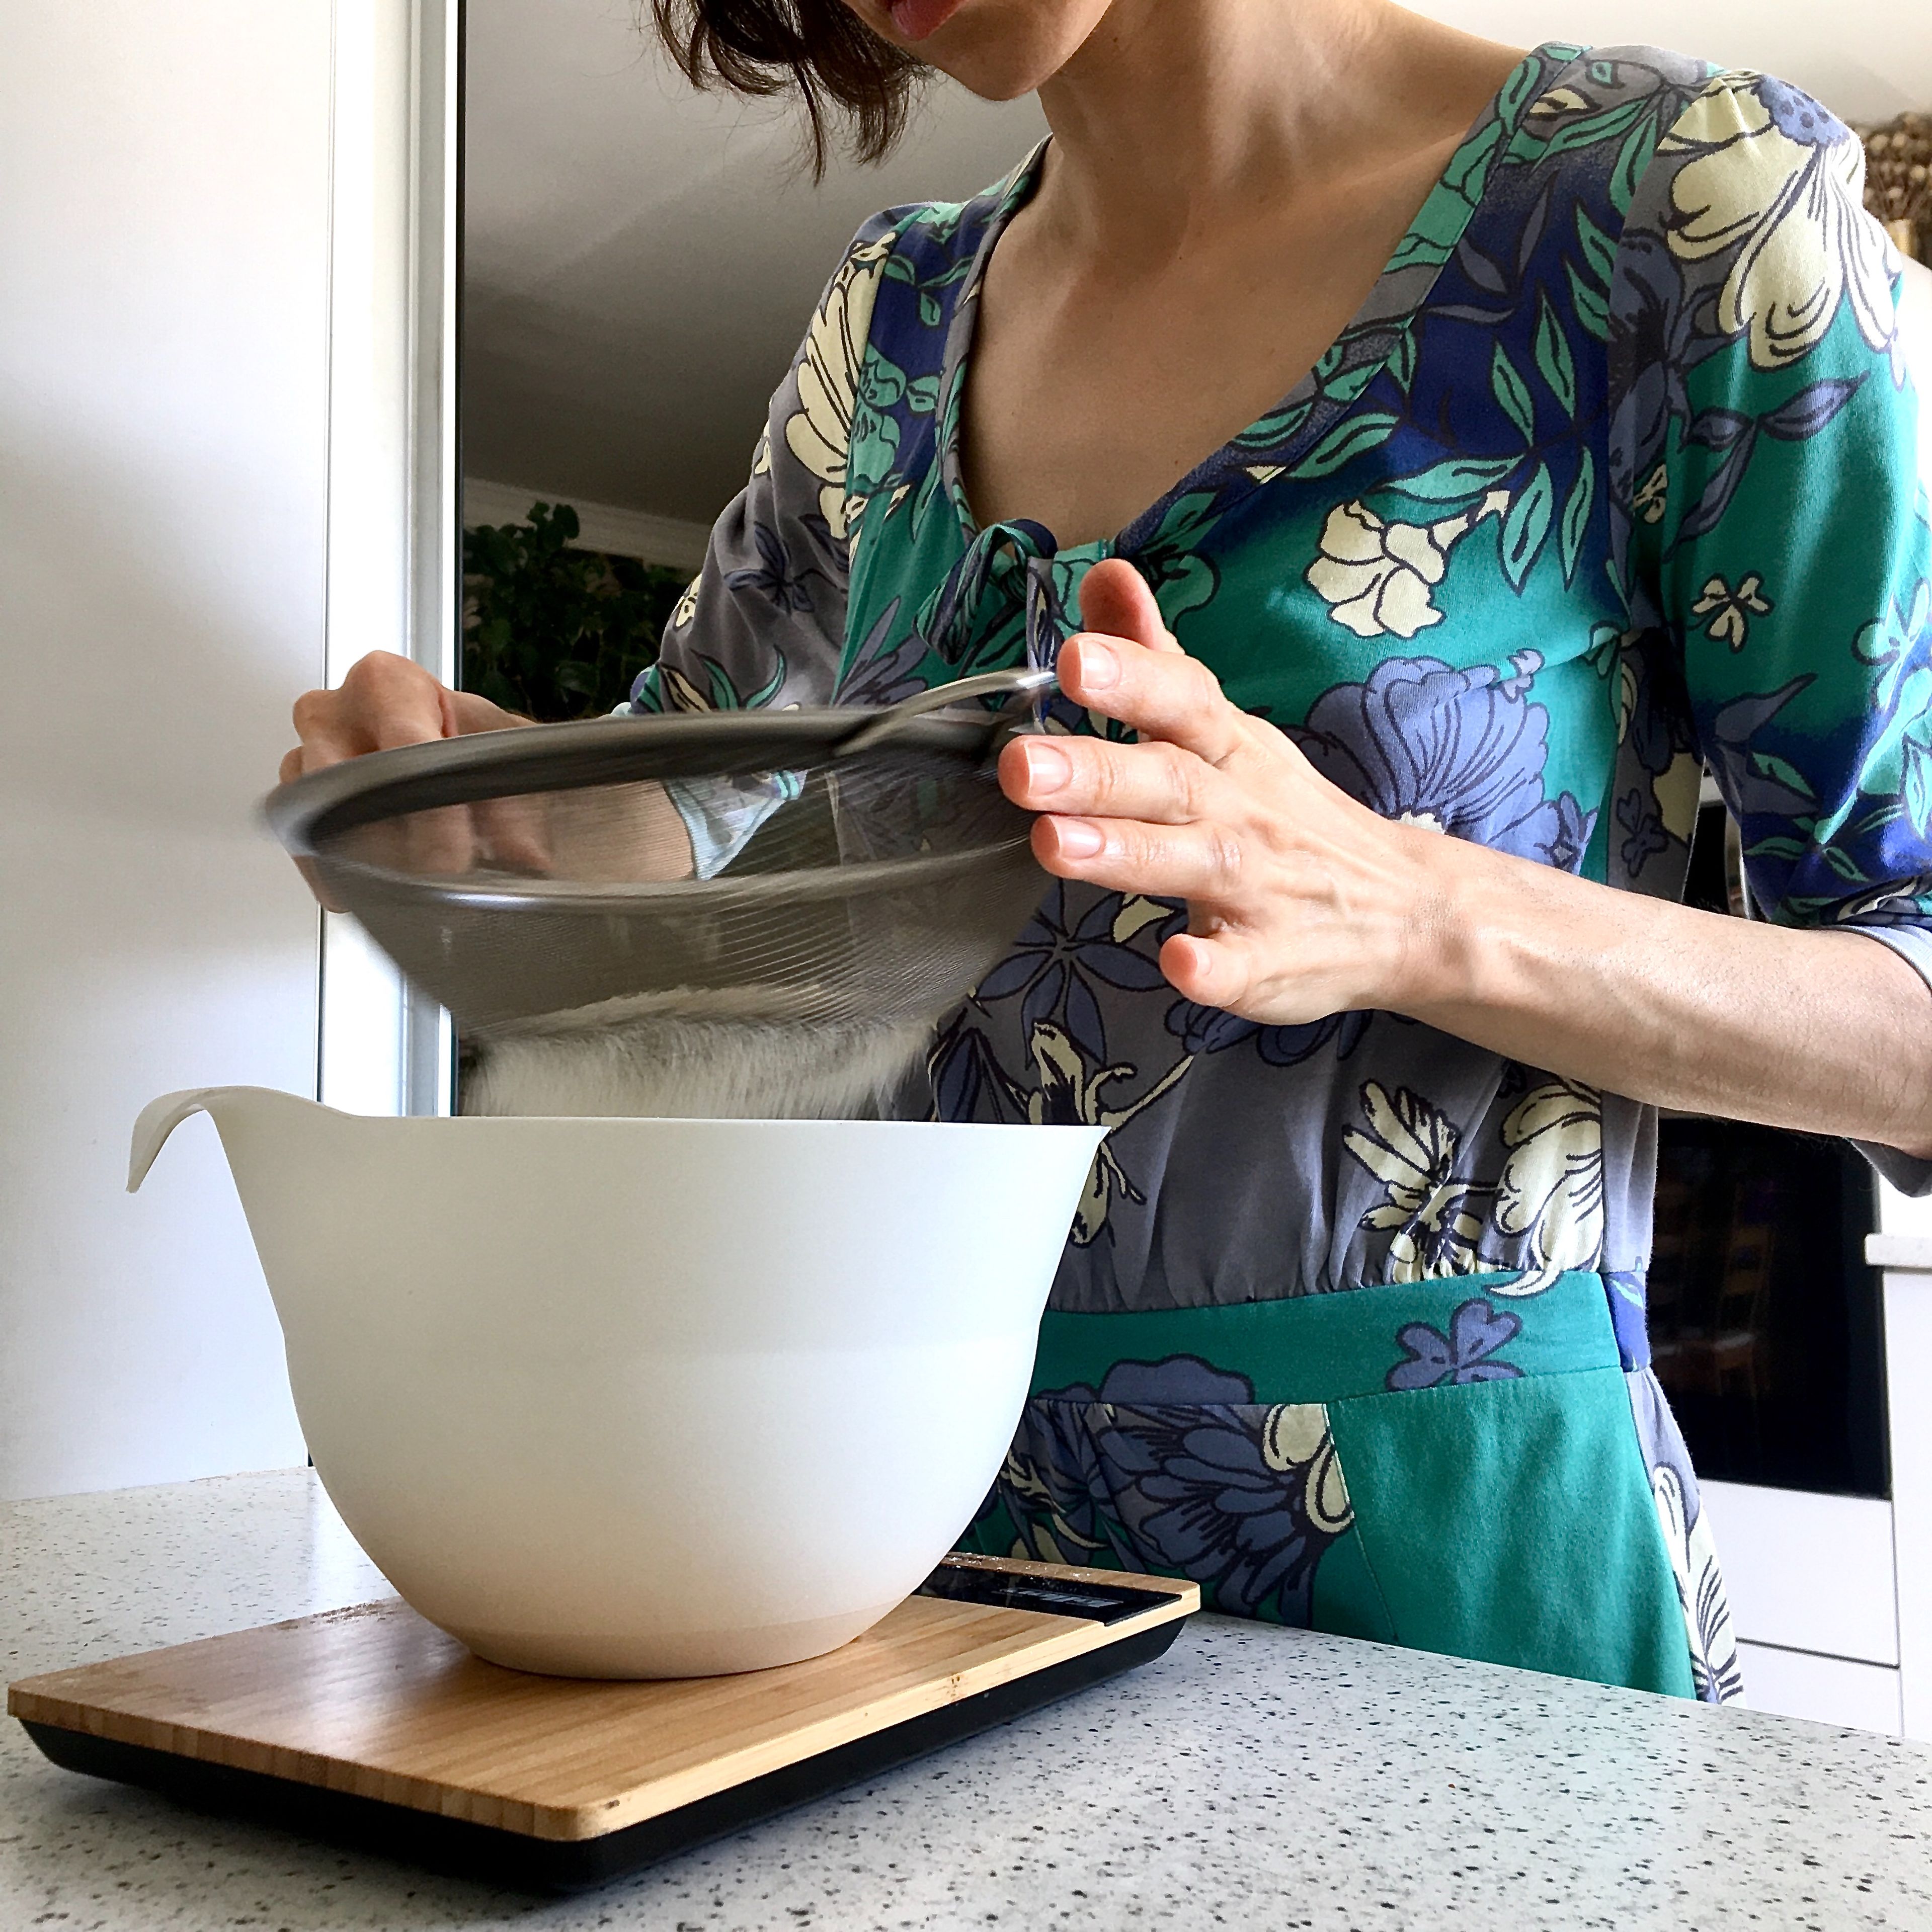 Sift the flour, wheat bran, both baking agents and salt in a bowl. Mix white wine and cherry juice in a measuring cup. Add dry ingredients to the bowl of your wet mixture. Pour in the liquid and fold slowly until no flour clumps are visible.